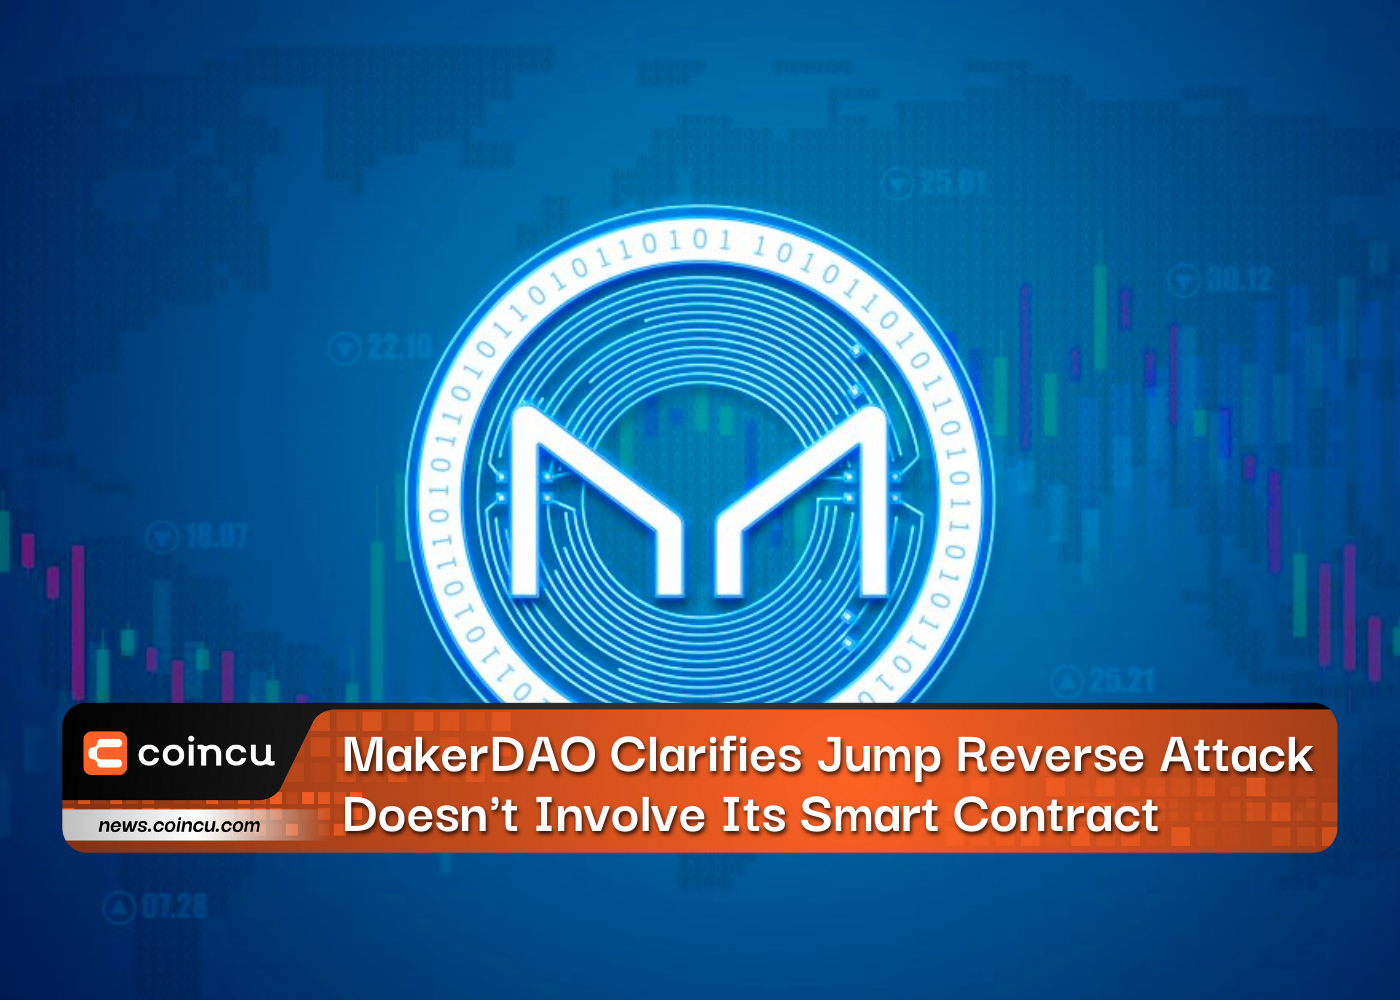 MakerDAO Clarifies Jump Reverse Attack Doesn't Involve Its Smart Contract